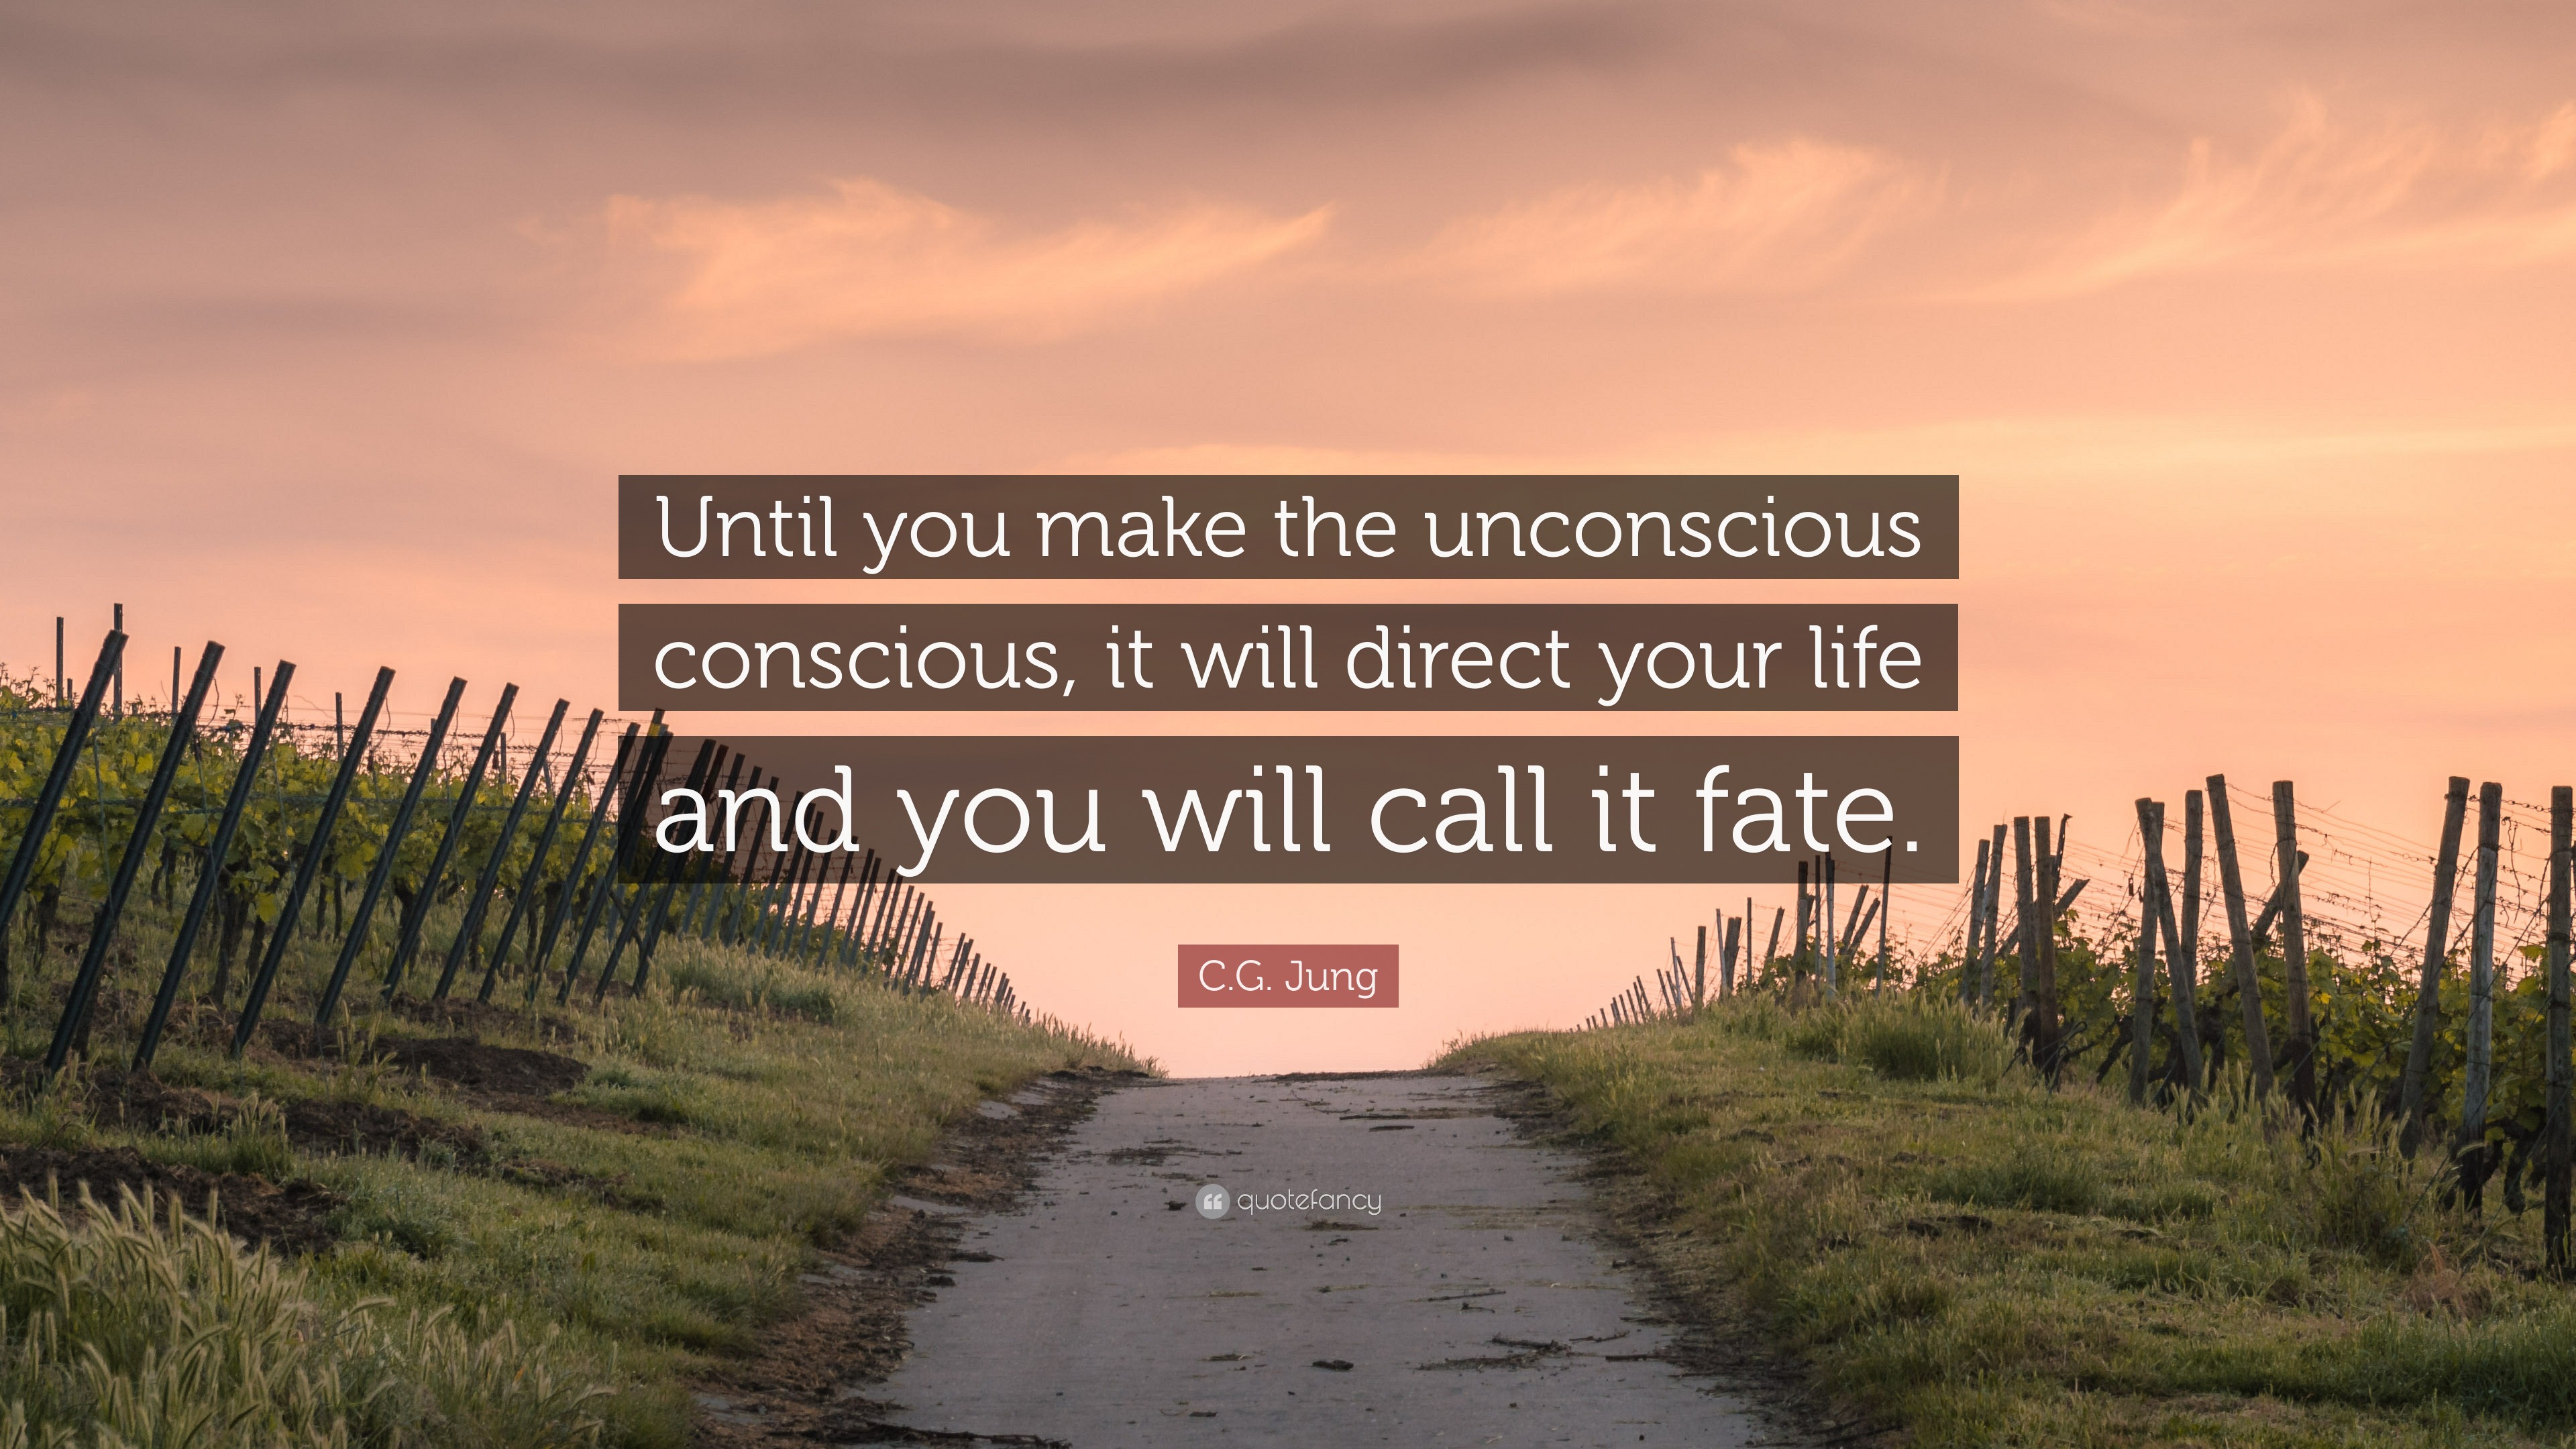 Cg Jung Quote “until You Make The Unconscious Conscious It Will Direct Your Life And You